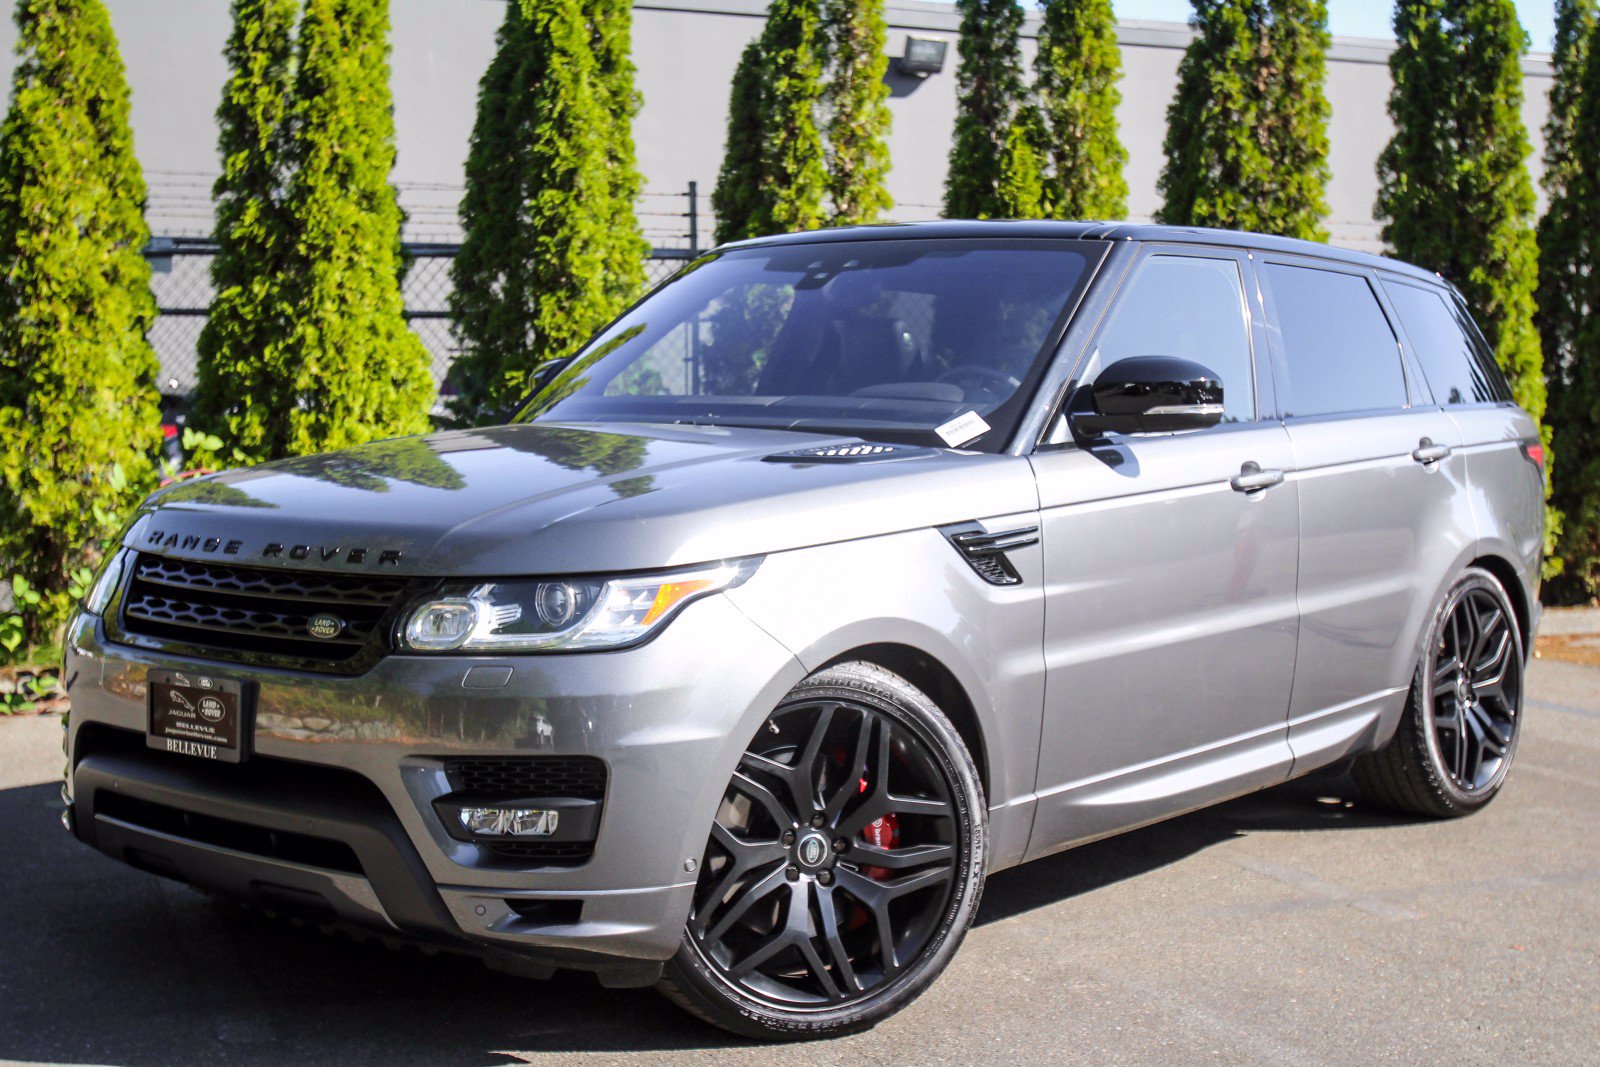 Range Rover Sport Bellevue  - Experience Its Plush Interior And Advanced Technology At Land Rover Bellevue.